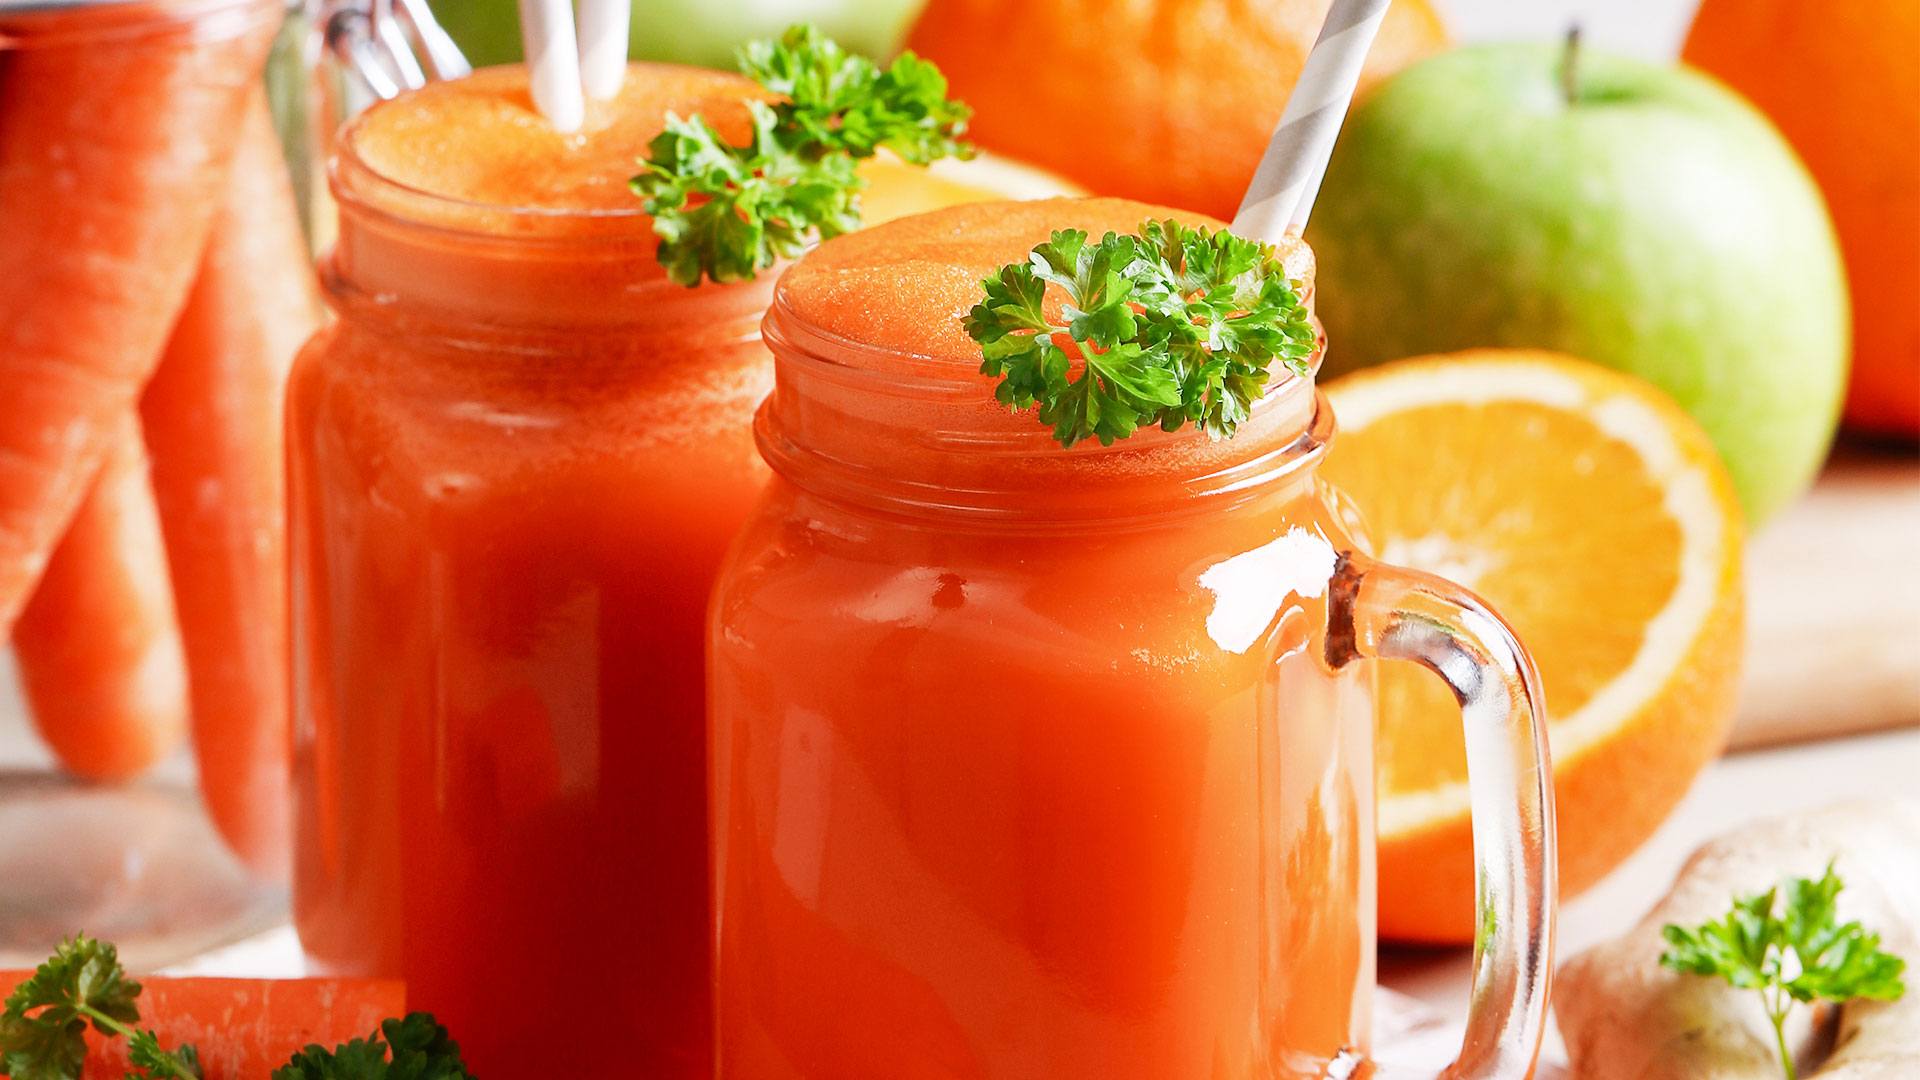 Apple-Carrot-Ginger Smoothie